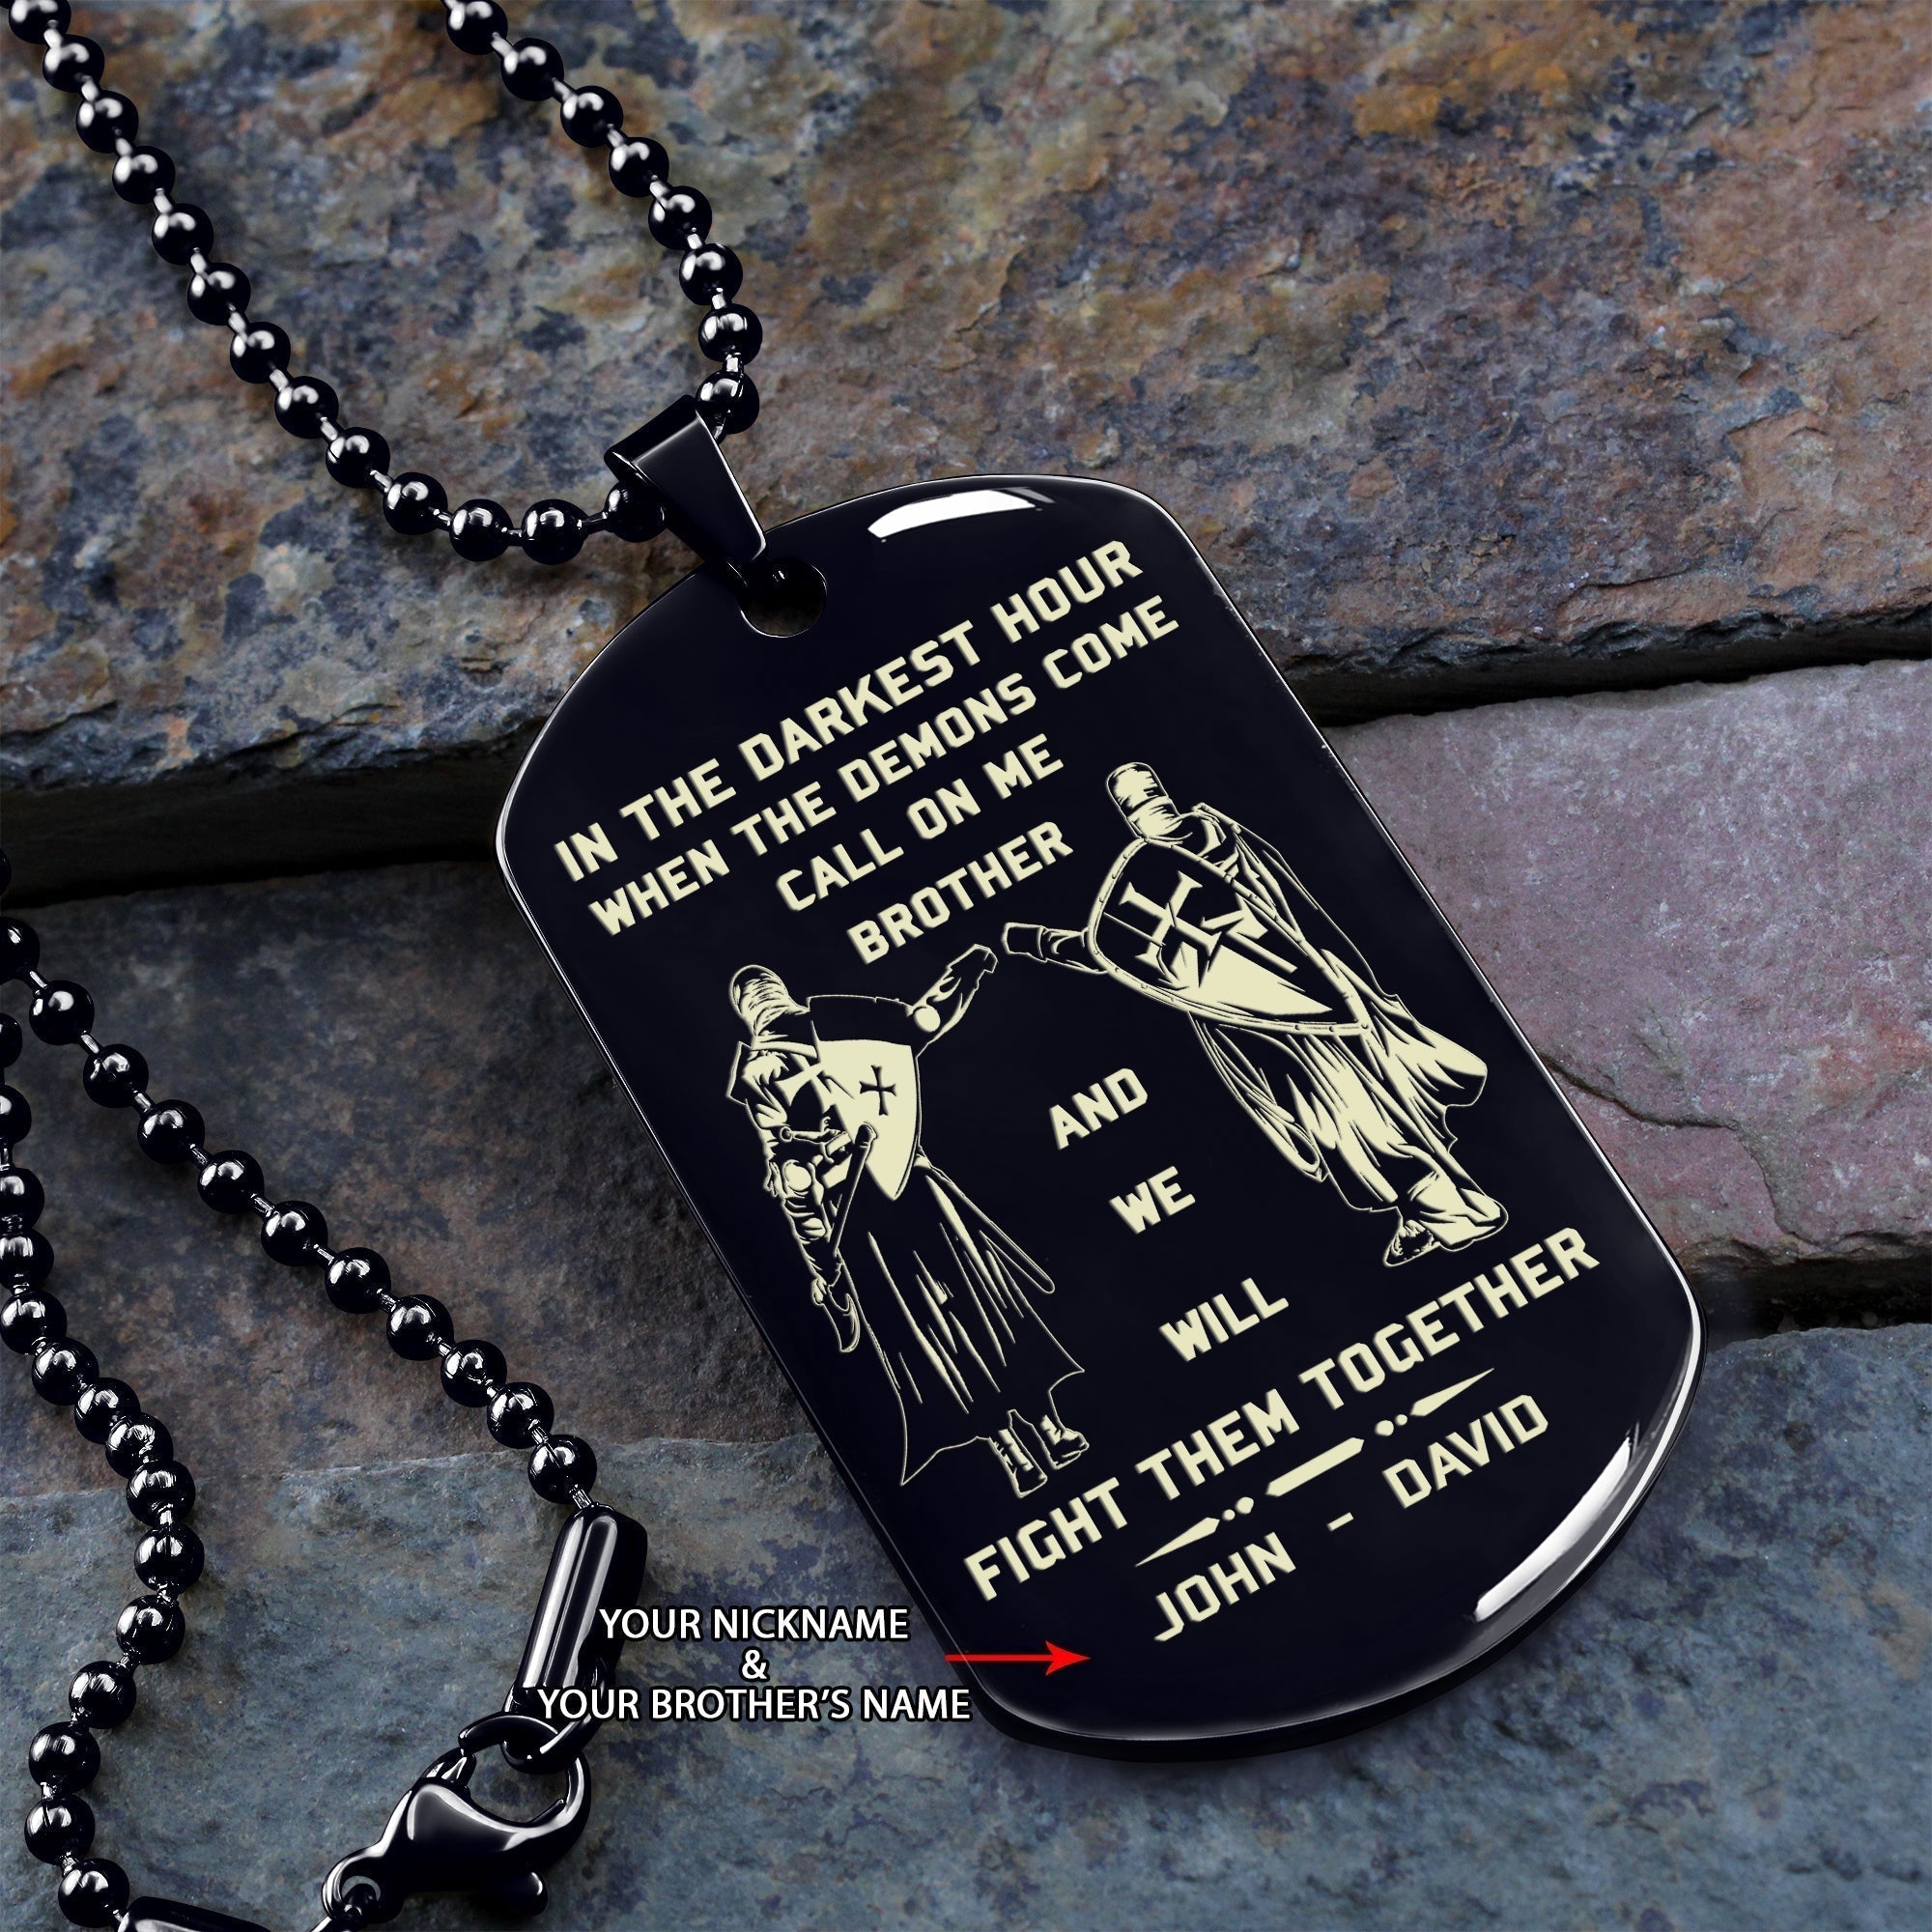 Memorial day-Customizable engraved brother dog tag gift from brother, In the darkest hour, When the demons come call on me brother and we will fight them together